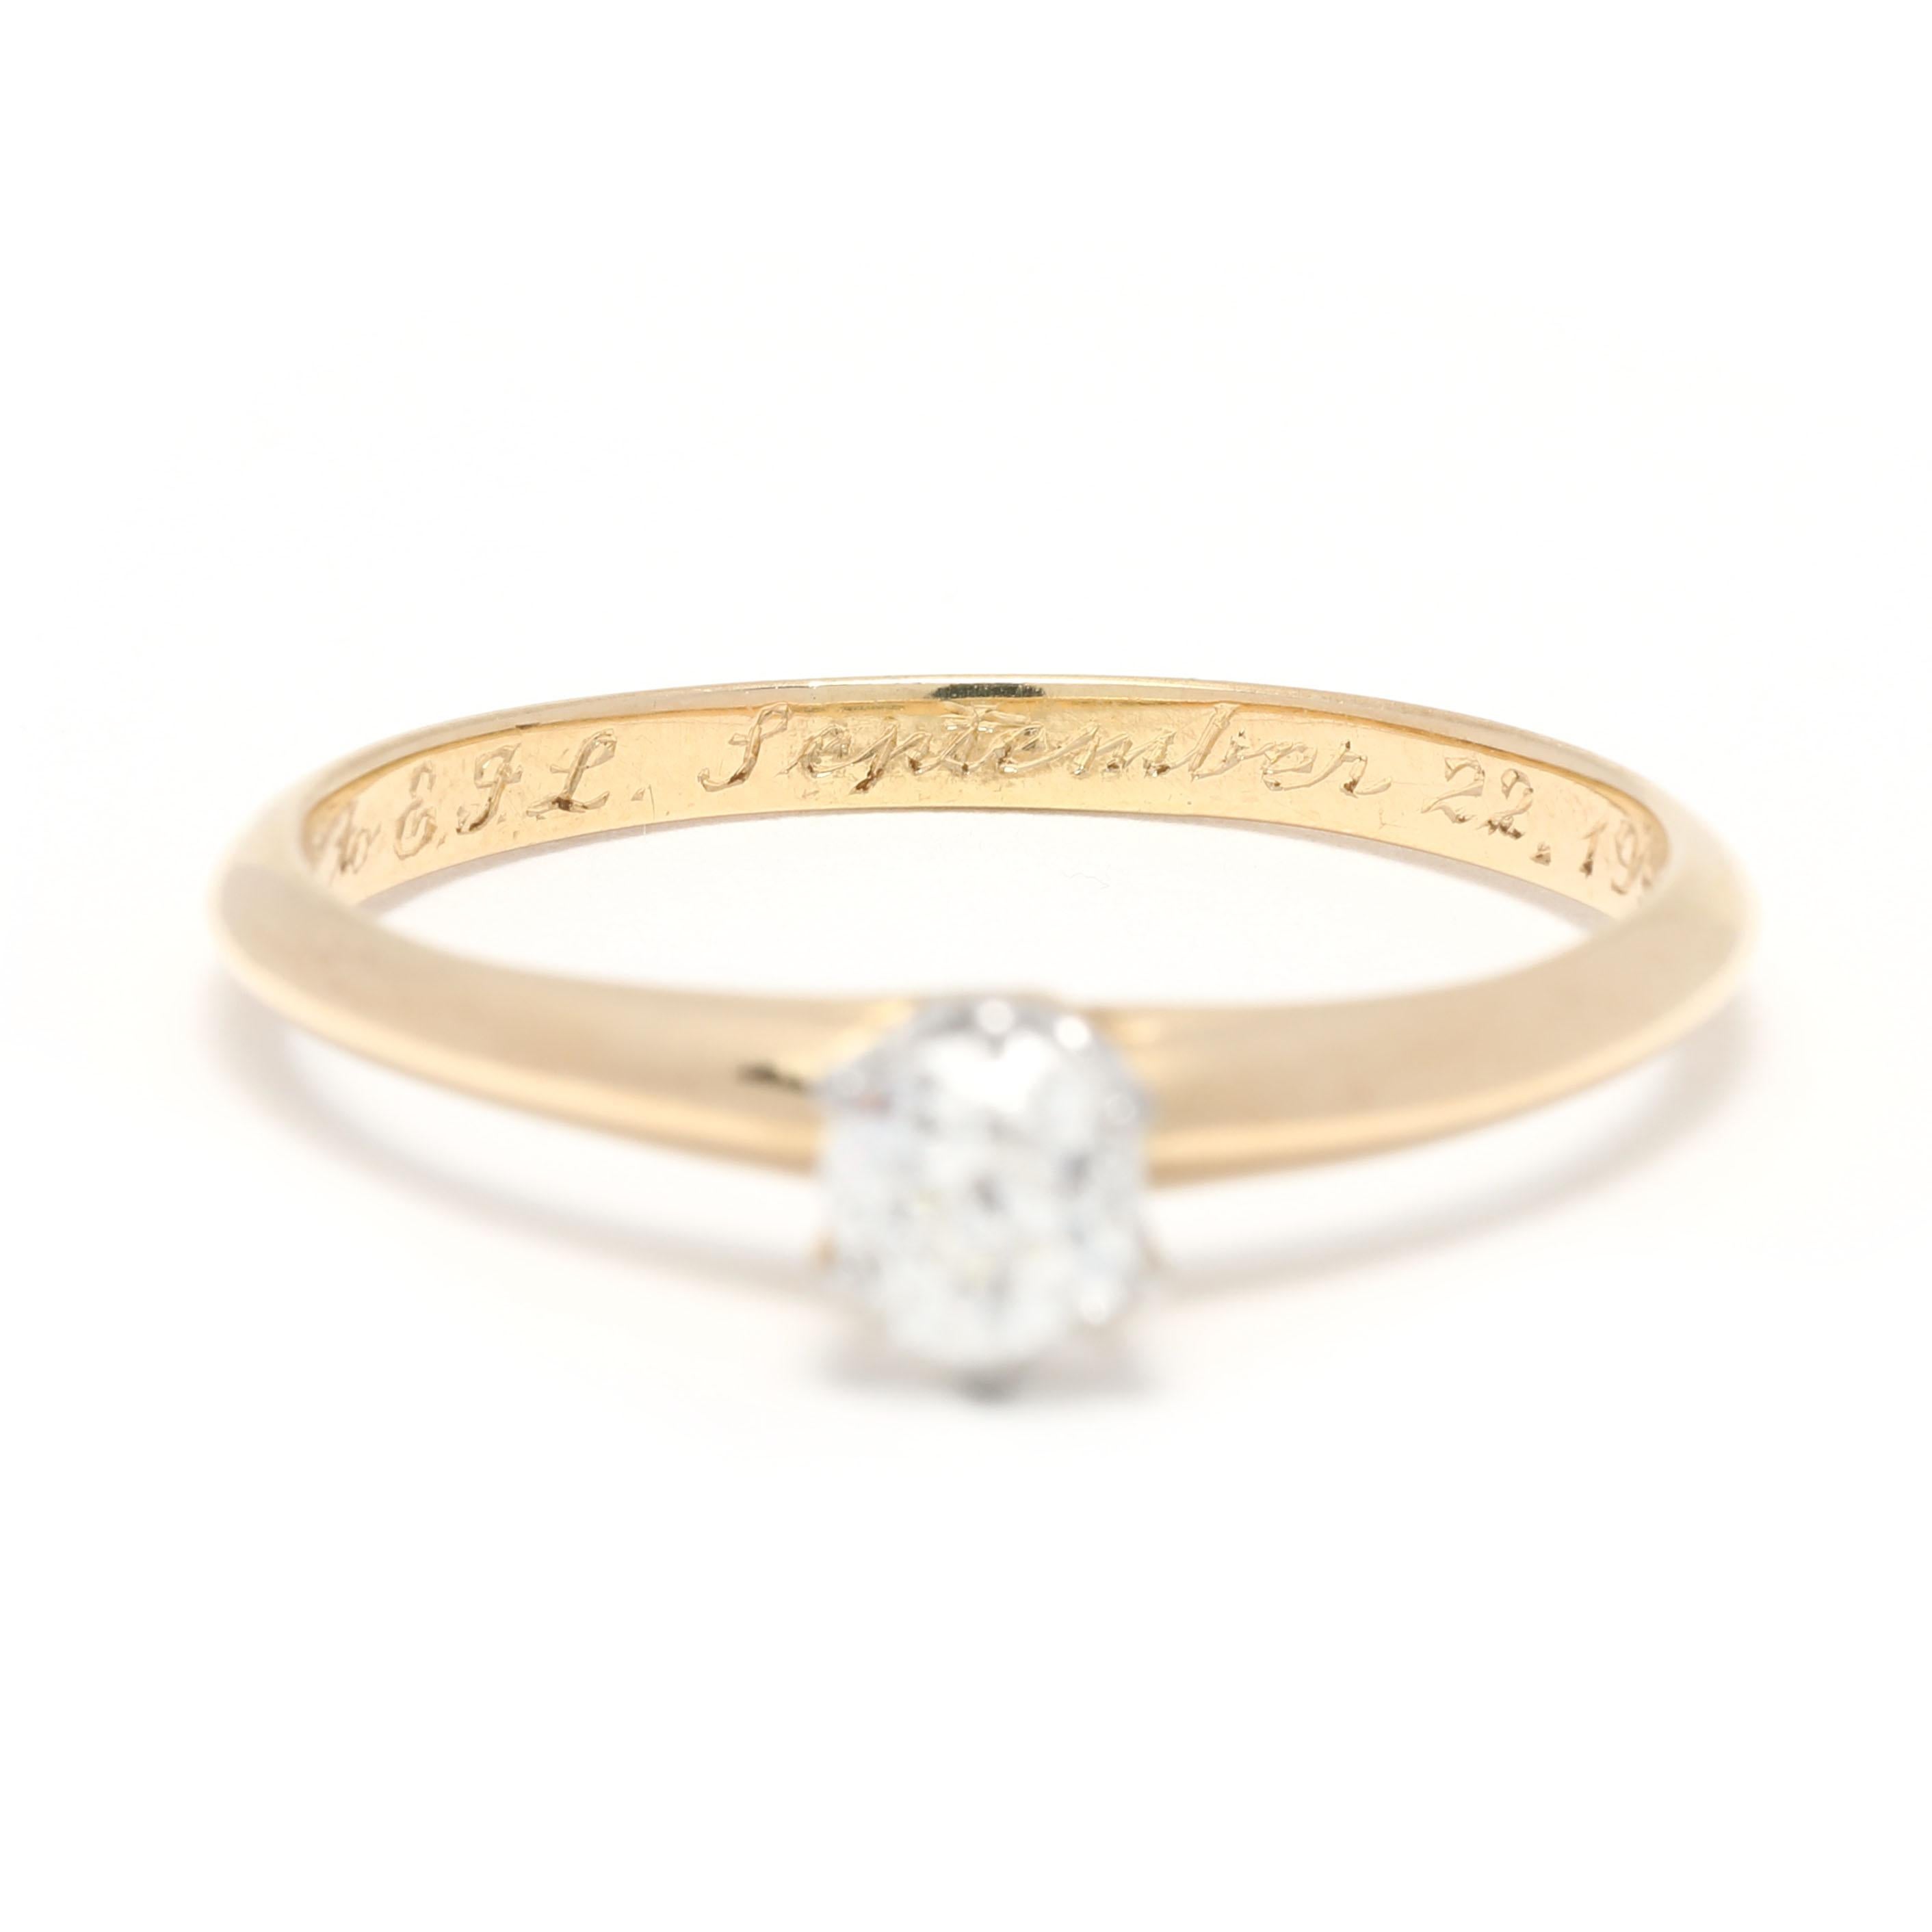 Retro Tiffany and Co. Diamond Solitaire Engagement Ring, Platinum 18kyg, Rs. 7.5 2